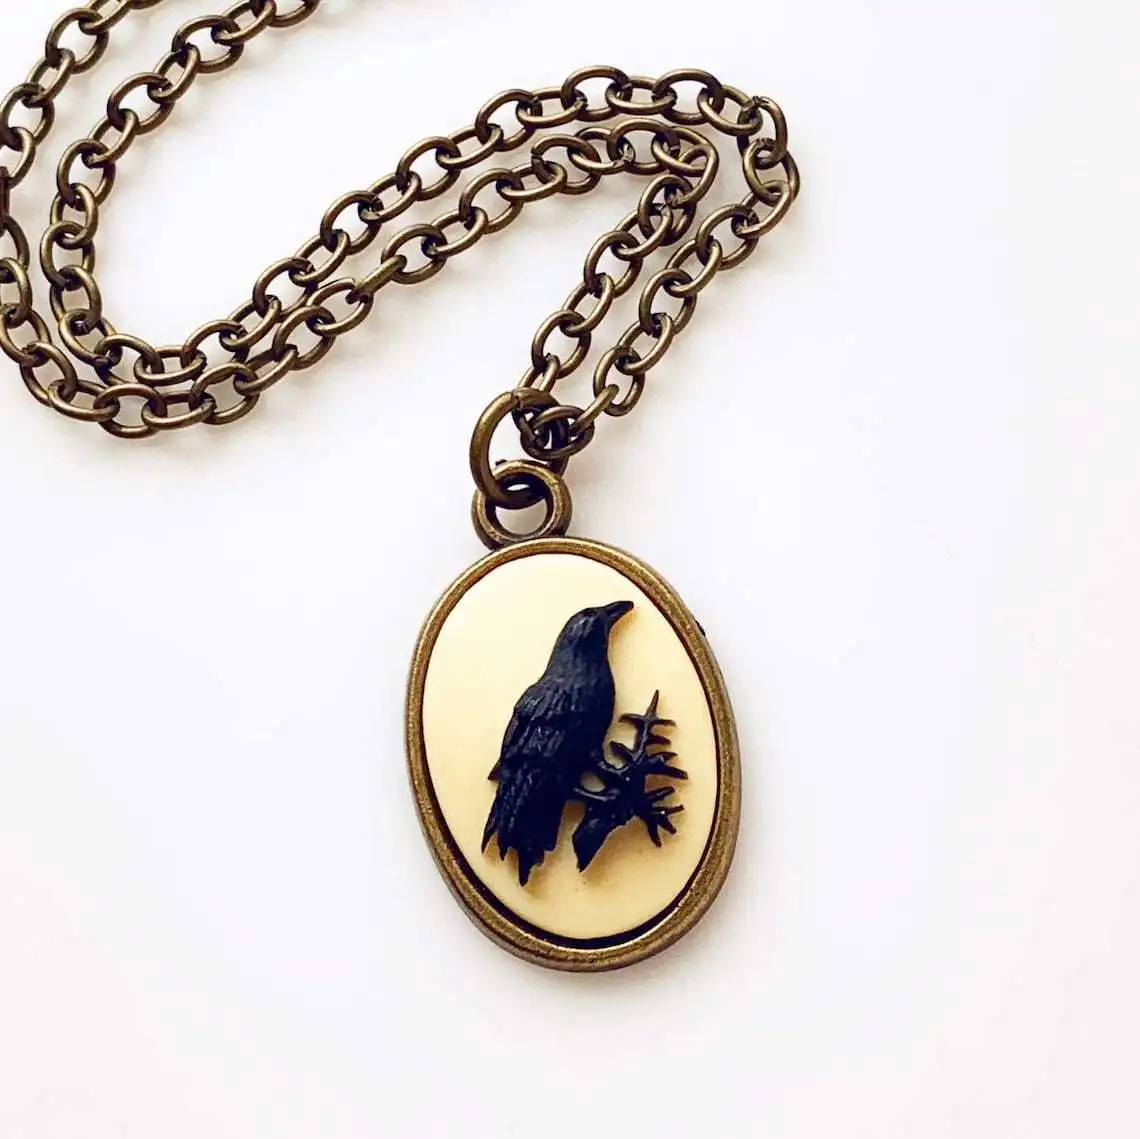 

Gothic Black Raven Cameo Necklace For Men Women Fashion Pagan Witch Jewelry Accessories Gift Vintage Raven Carved Charm Choker